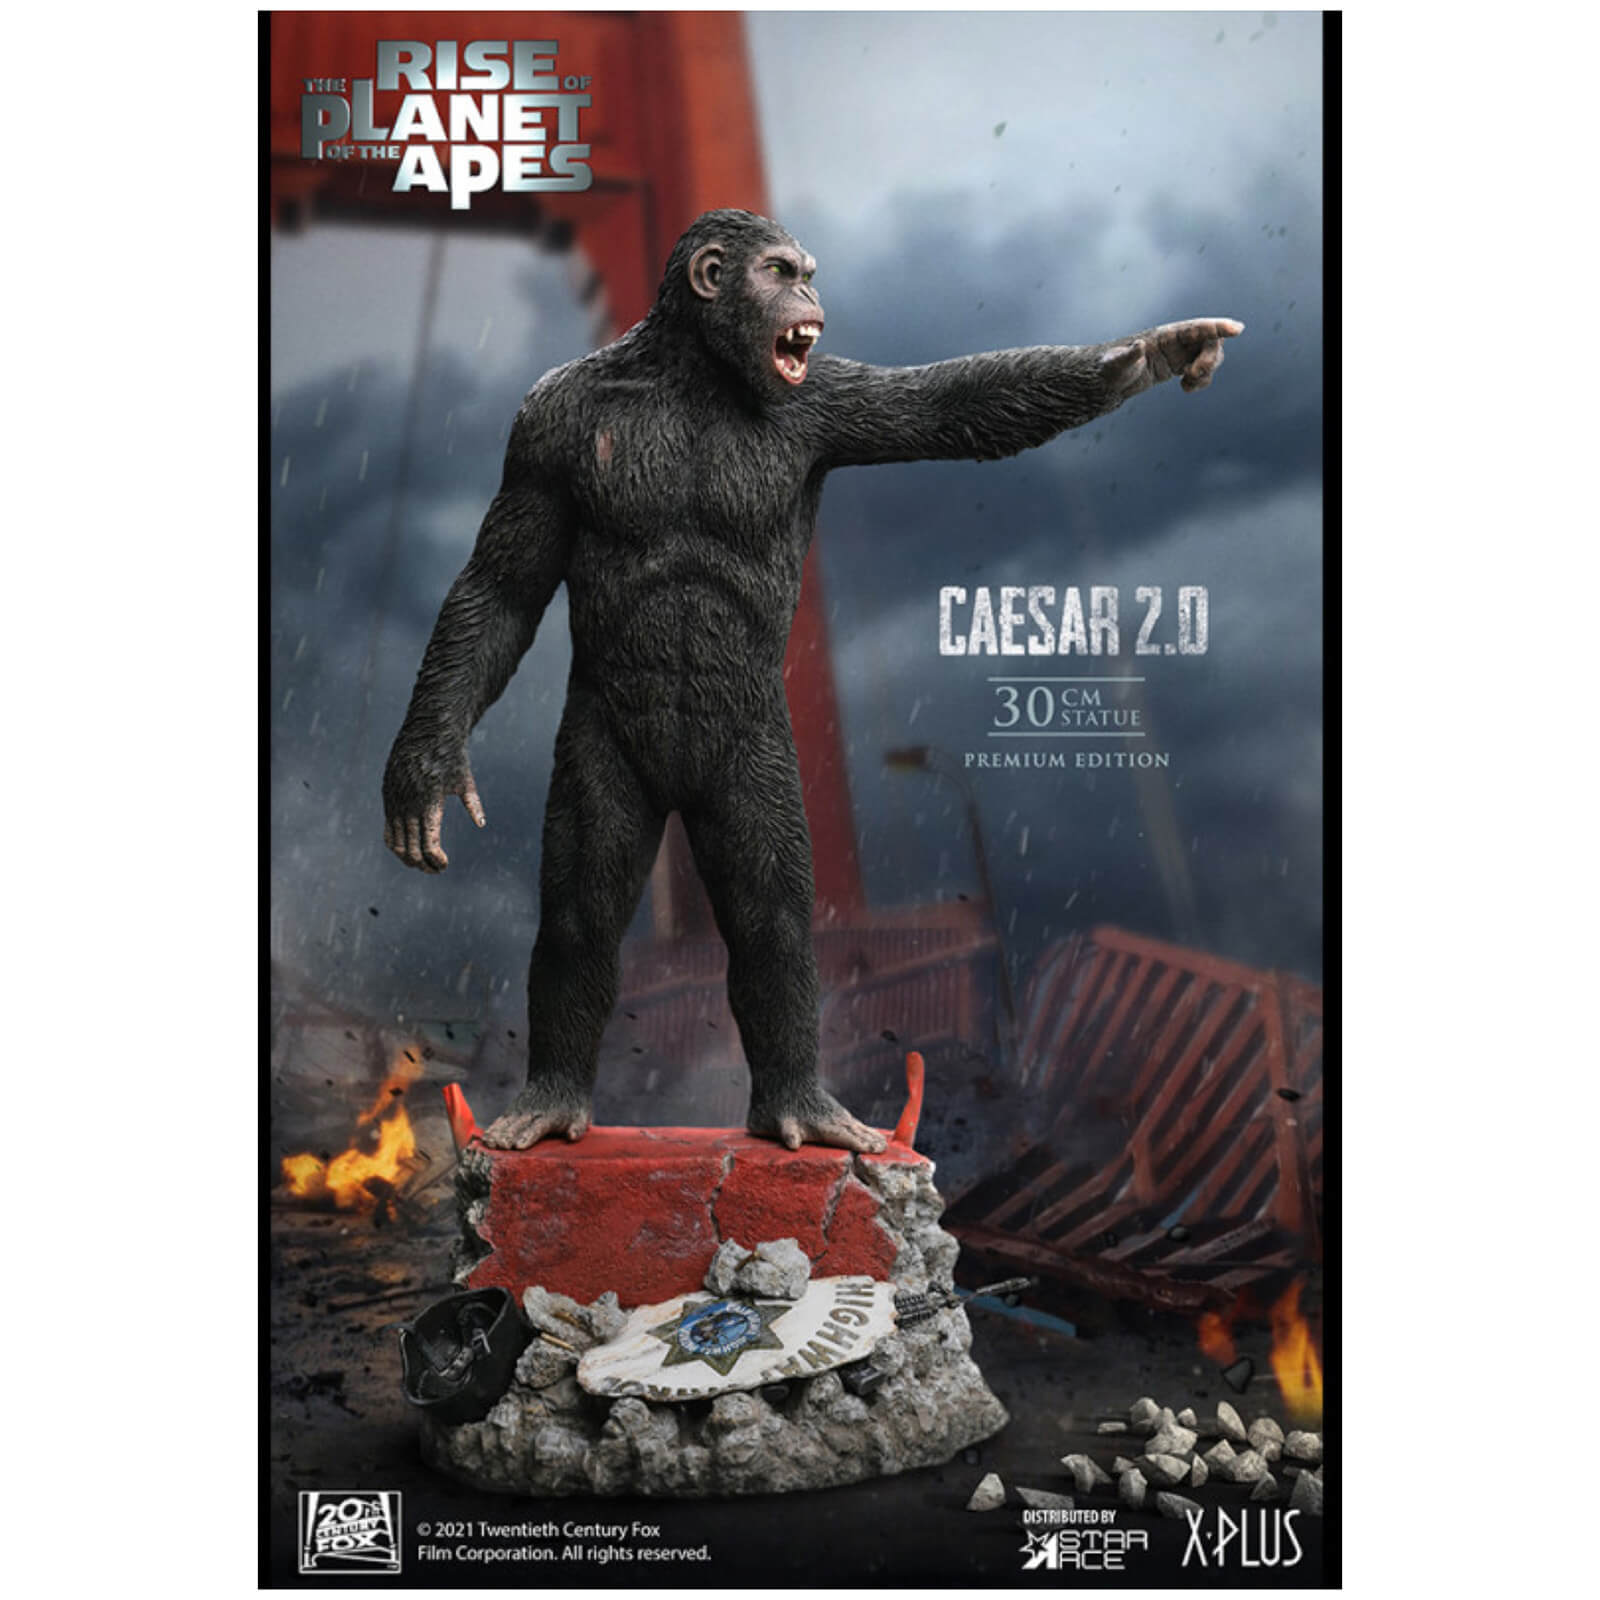 Star Ace Rise Of The Planet Of The Apes Super Vinyl Series Statue - Caesar 2.0 (Deluxe Version)